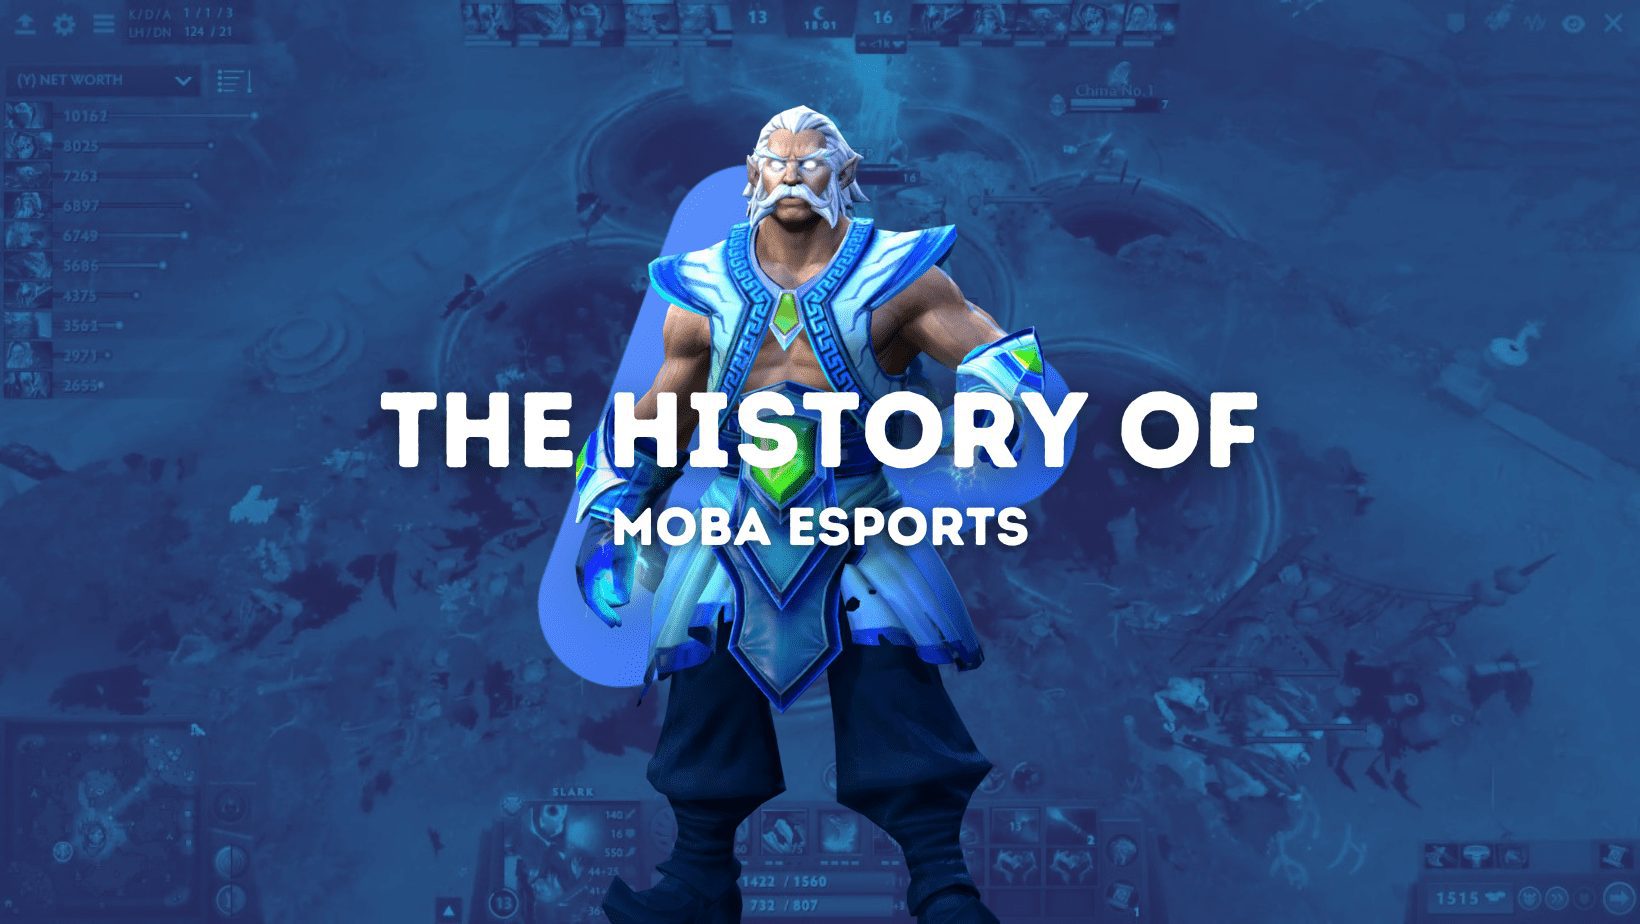 The History of MOBA Esports